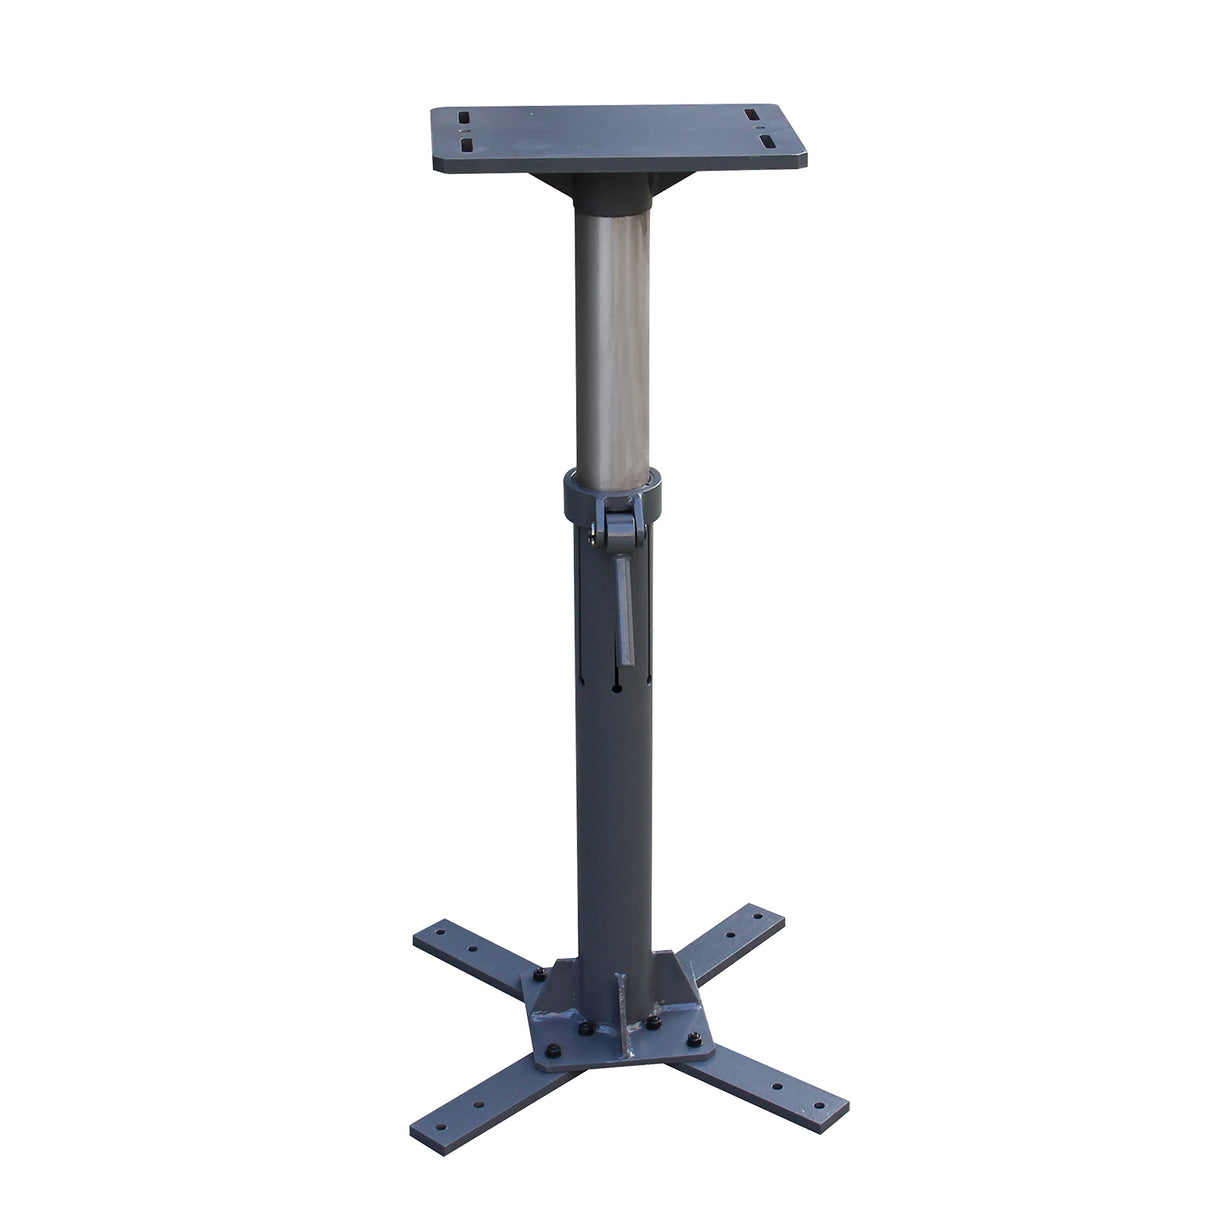 Kang Industrial TR-50 Stand, 650-900mm Height Adjustment